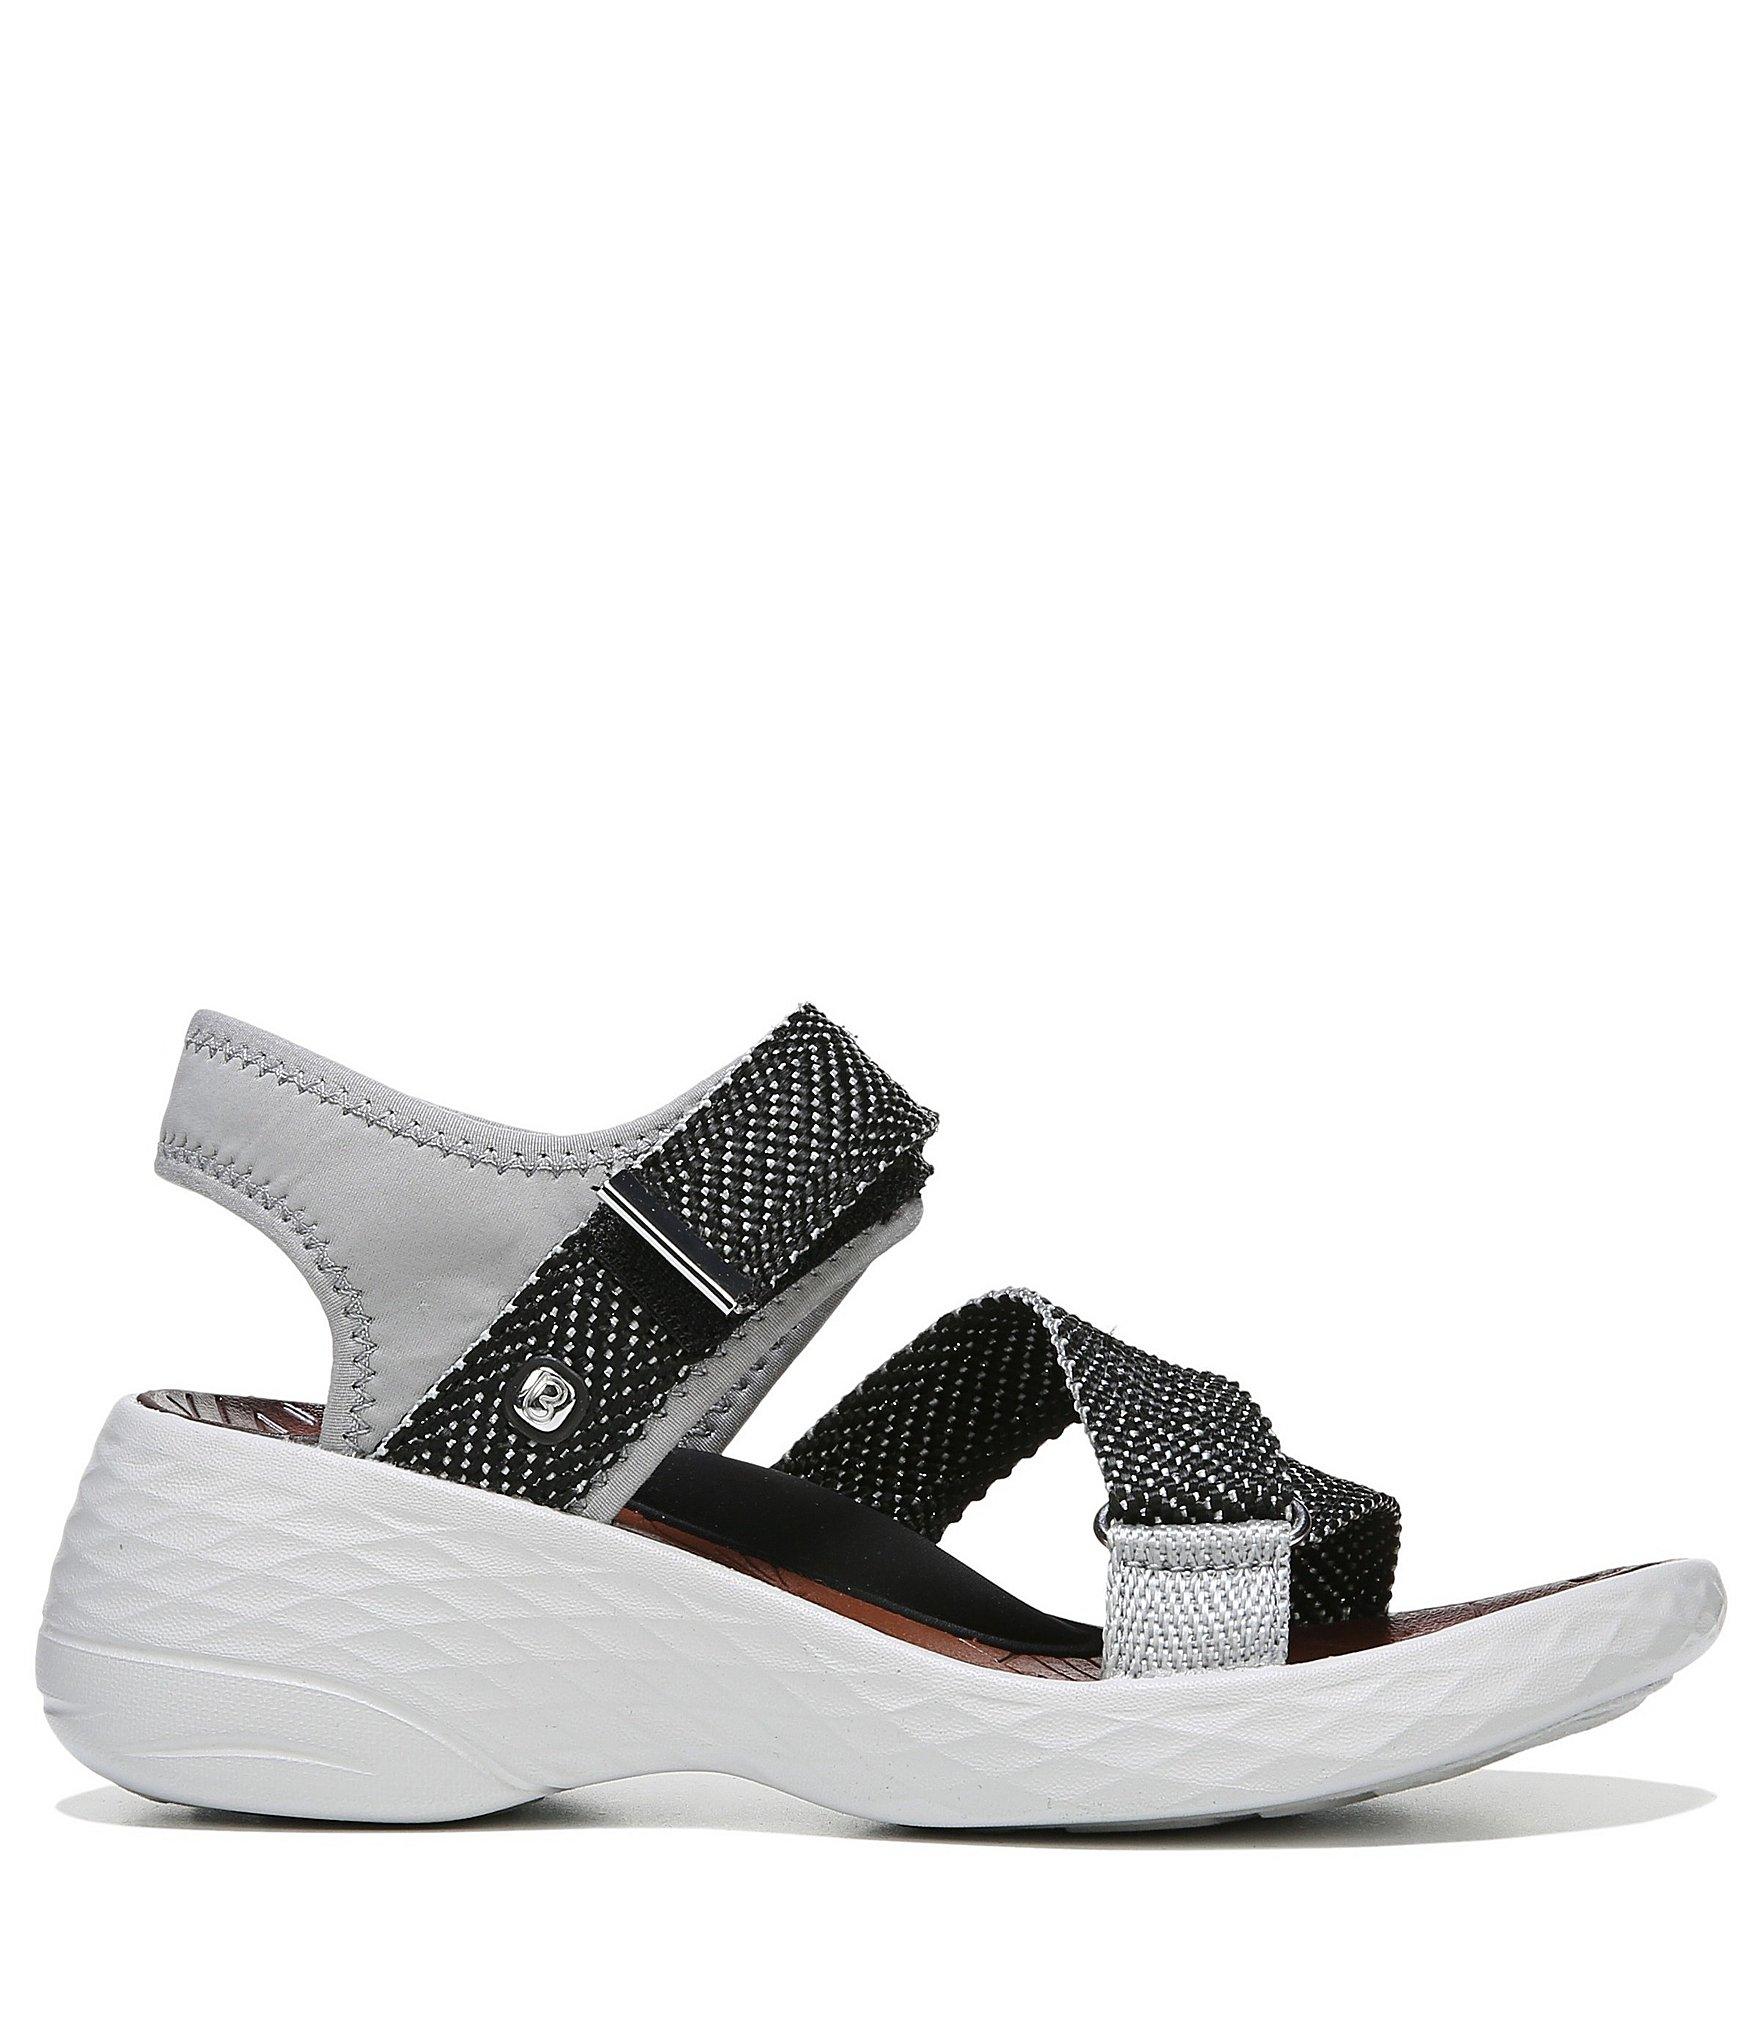 Bzees Synthetic Jive Wedge Sandals in Gray - Lyst